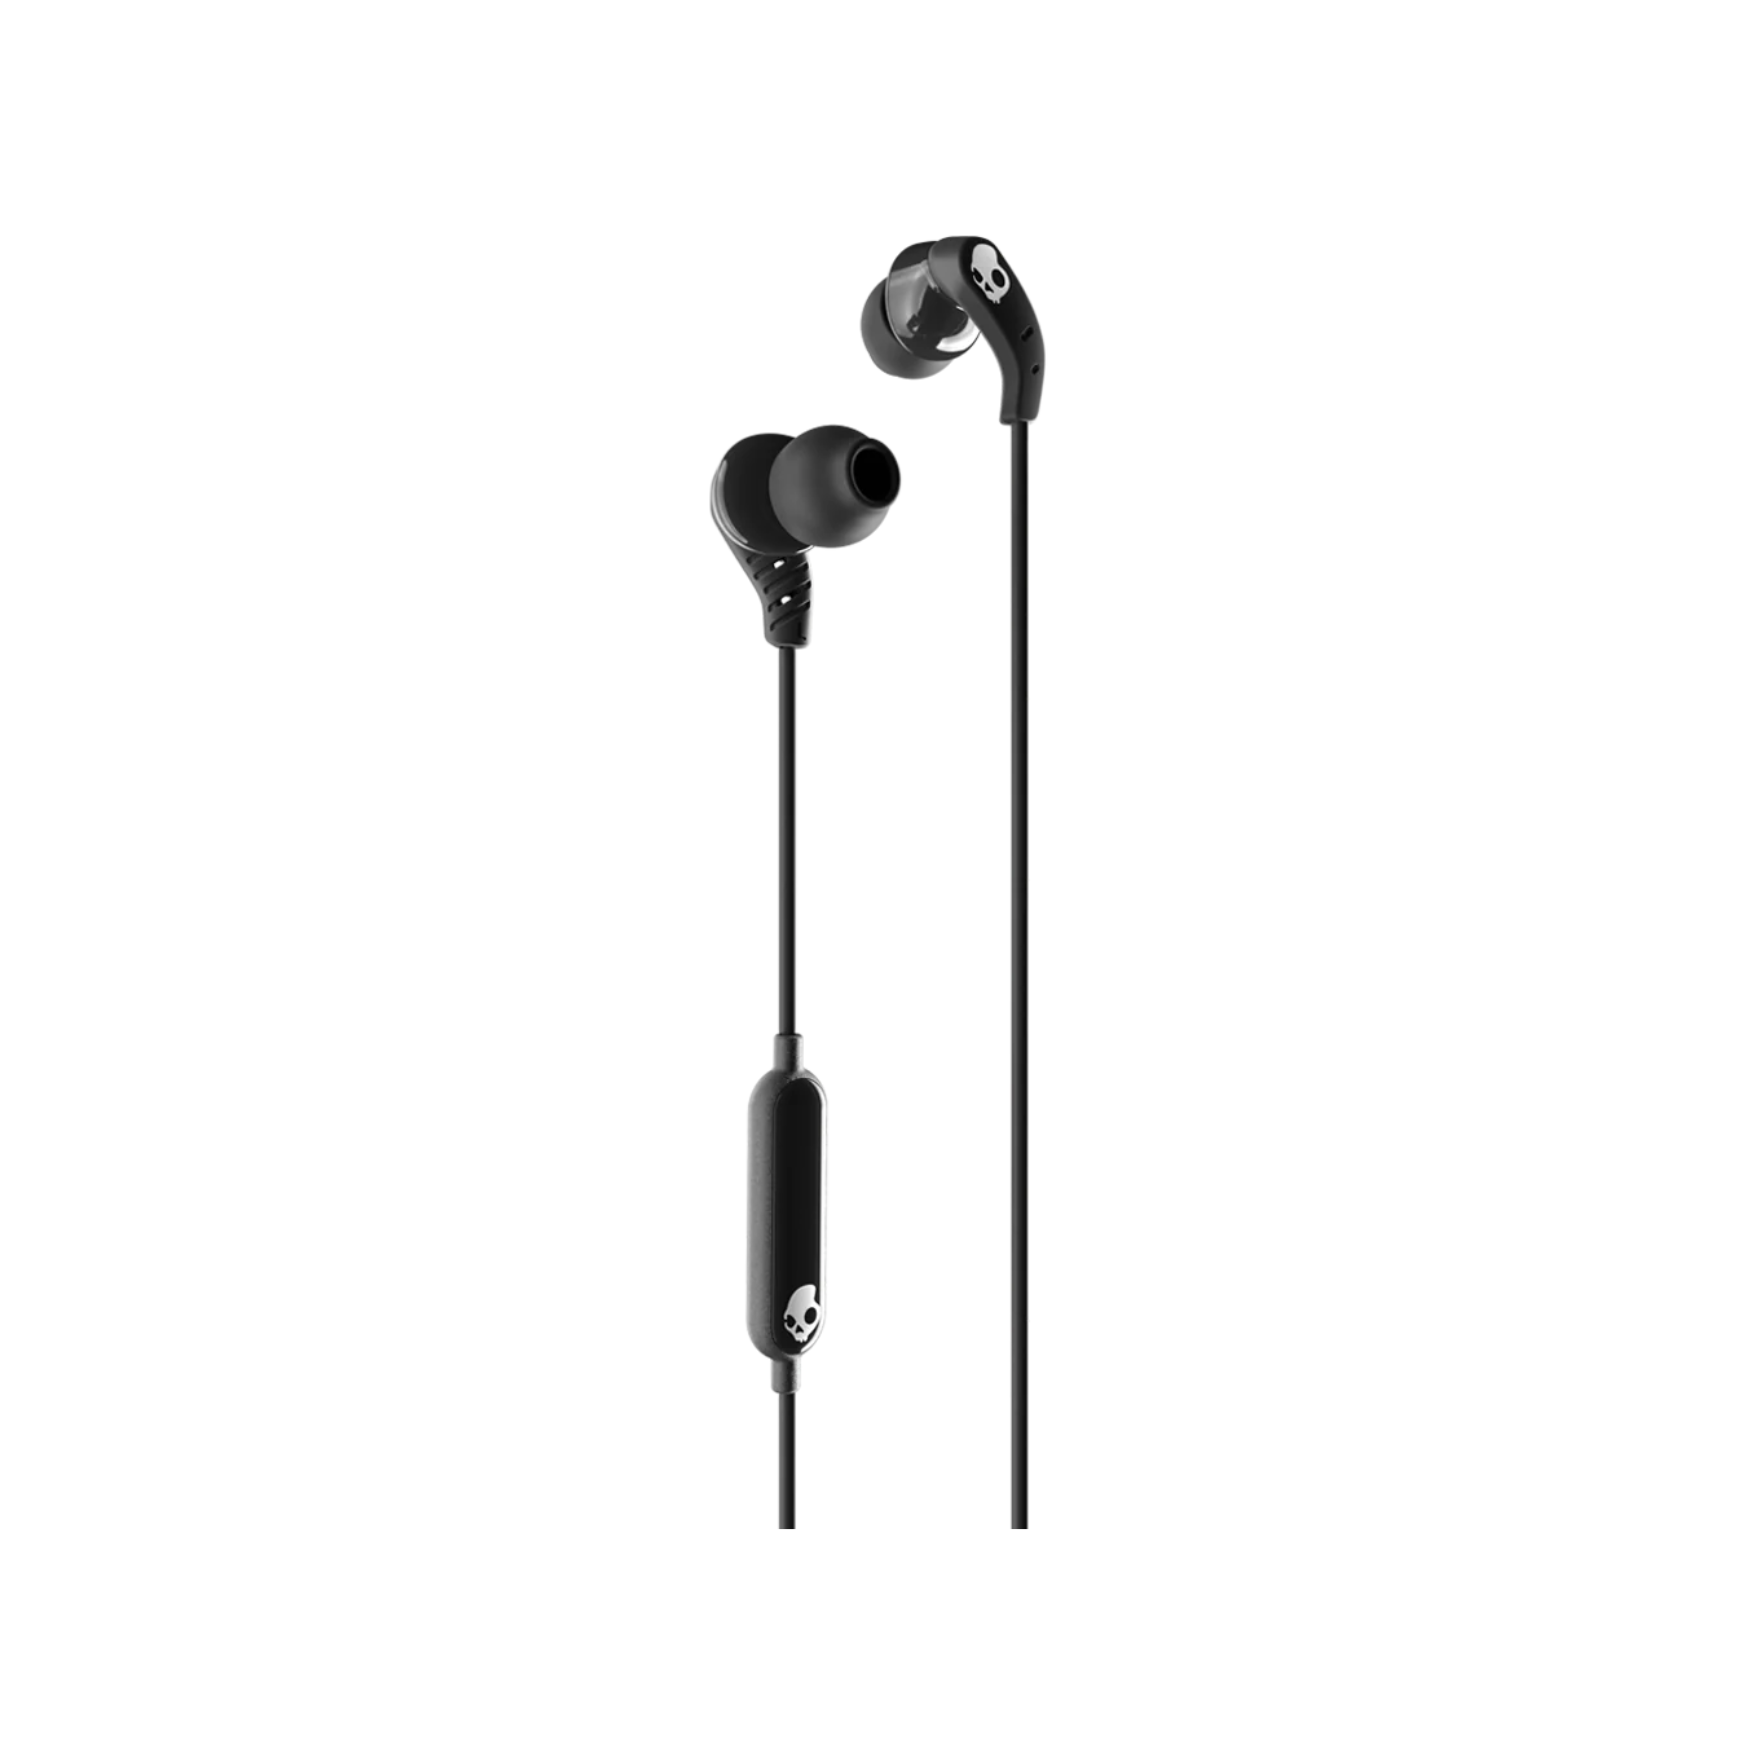 Skullcandy Set USB-C In-Ear Wired Earbuds | IPX4 Sweat Water Resistant | Noise Isolating Fit | Call and Track Control